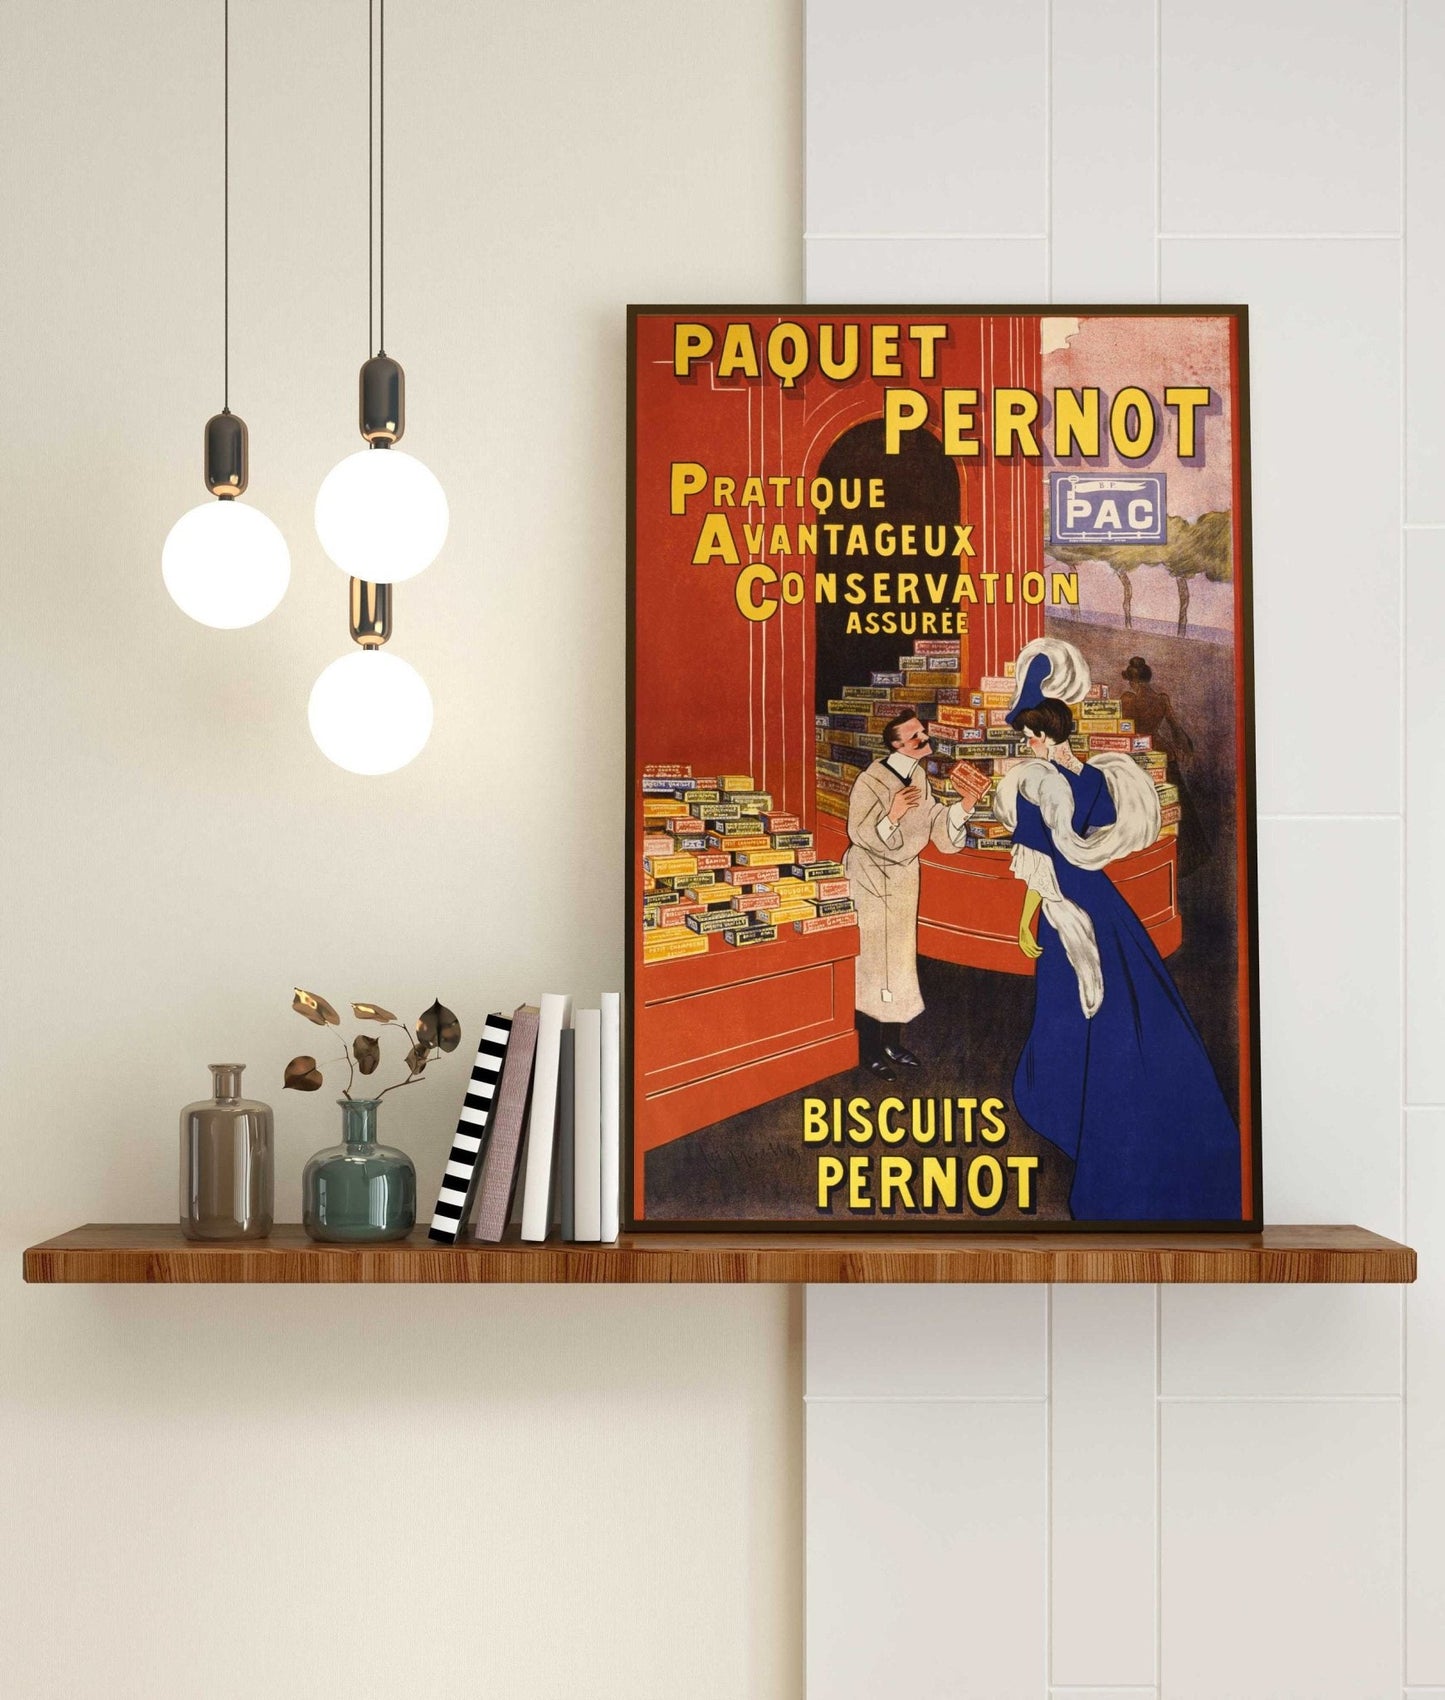 LEONETTO CAPPIELLO - Paquet Pernot Biscuits (Vintage Exhibition Poster)